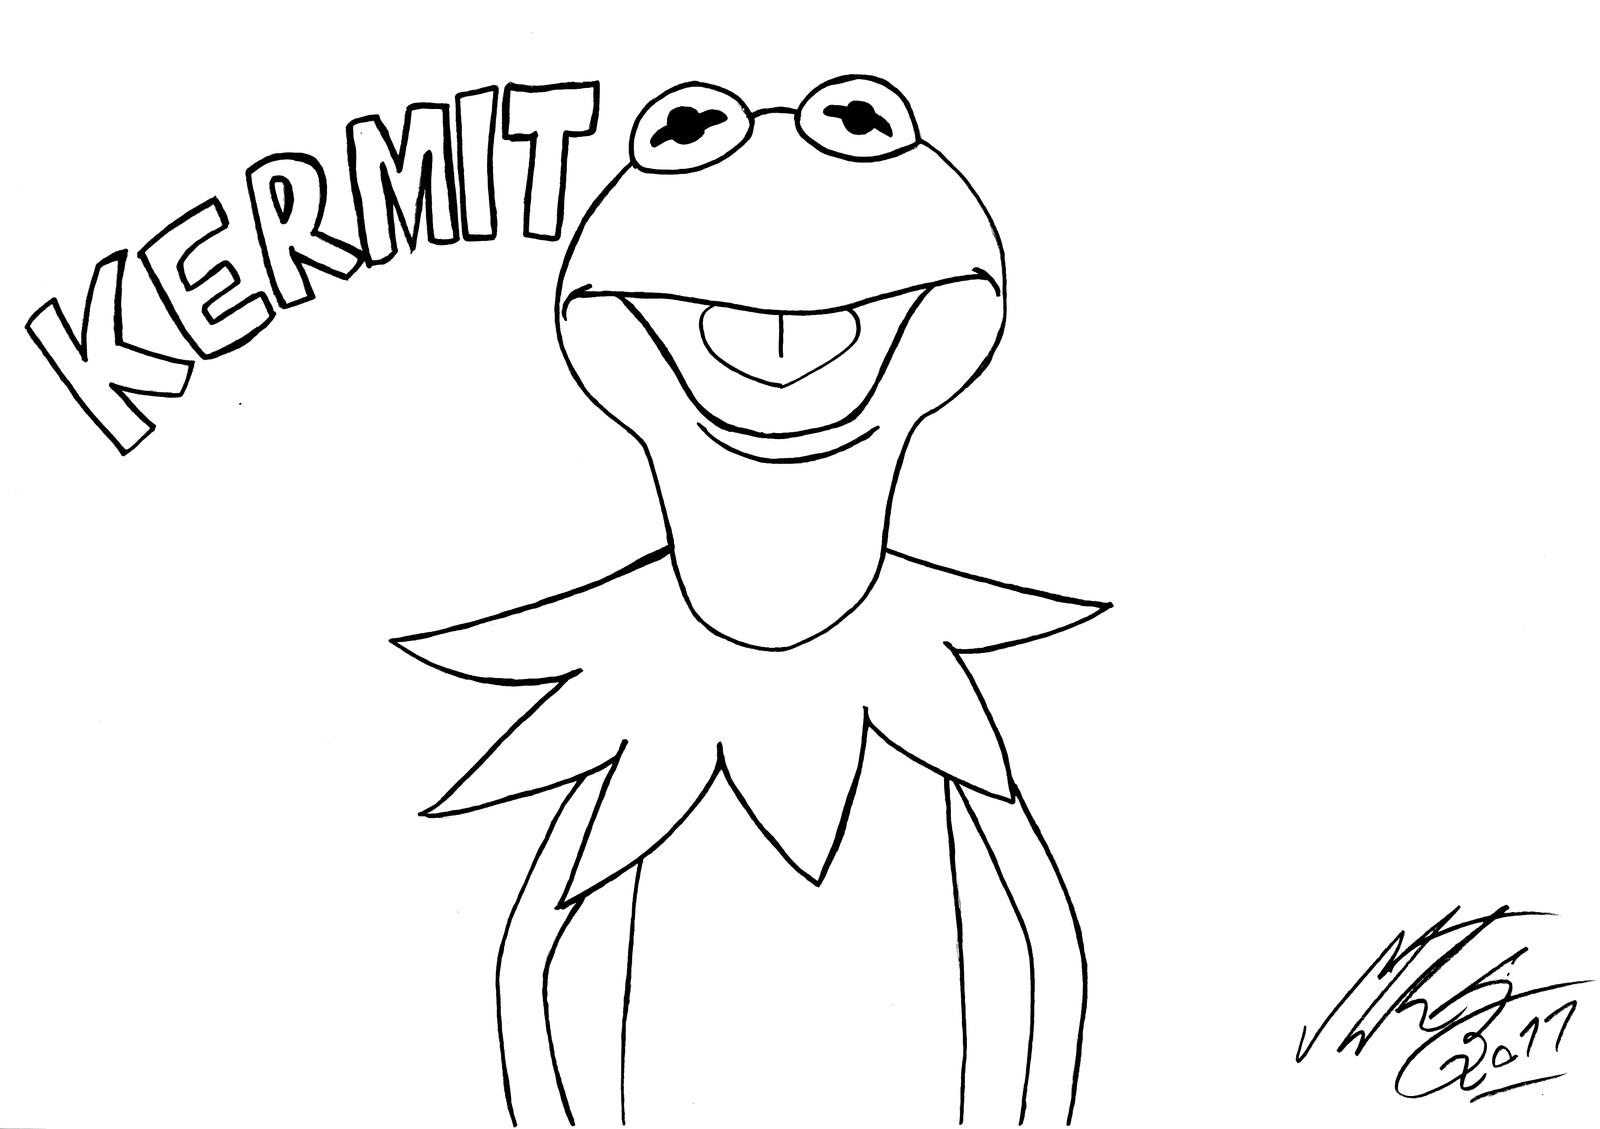 Kermit the frog by morteneng on